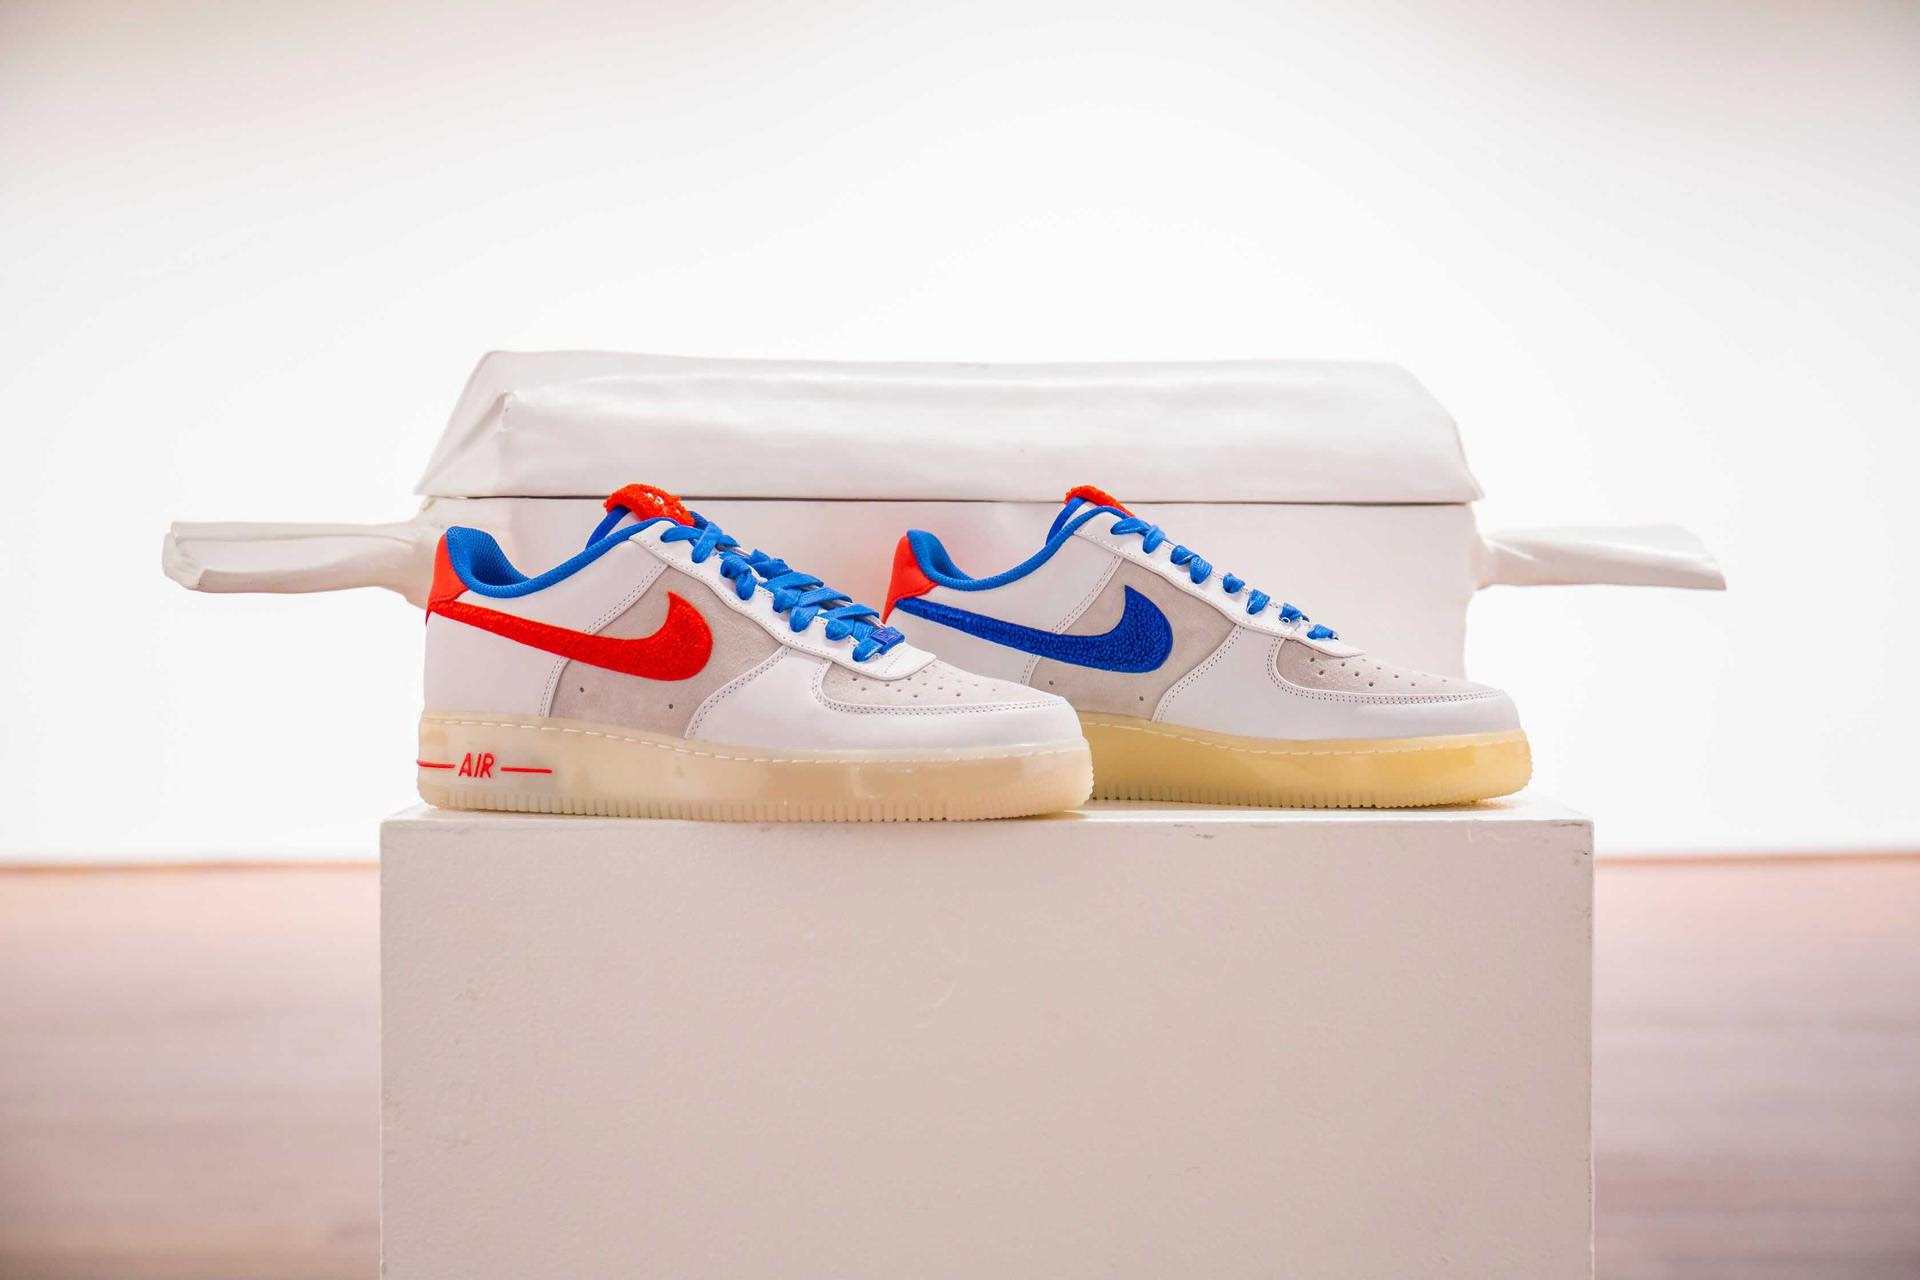 Sotheby's Drops Legendary Collection of Nike Air Force 1s in Buy Now Sneaker - RESPECT. | Photo Journal of Hip-Hop Culture